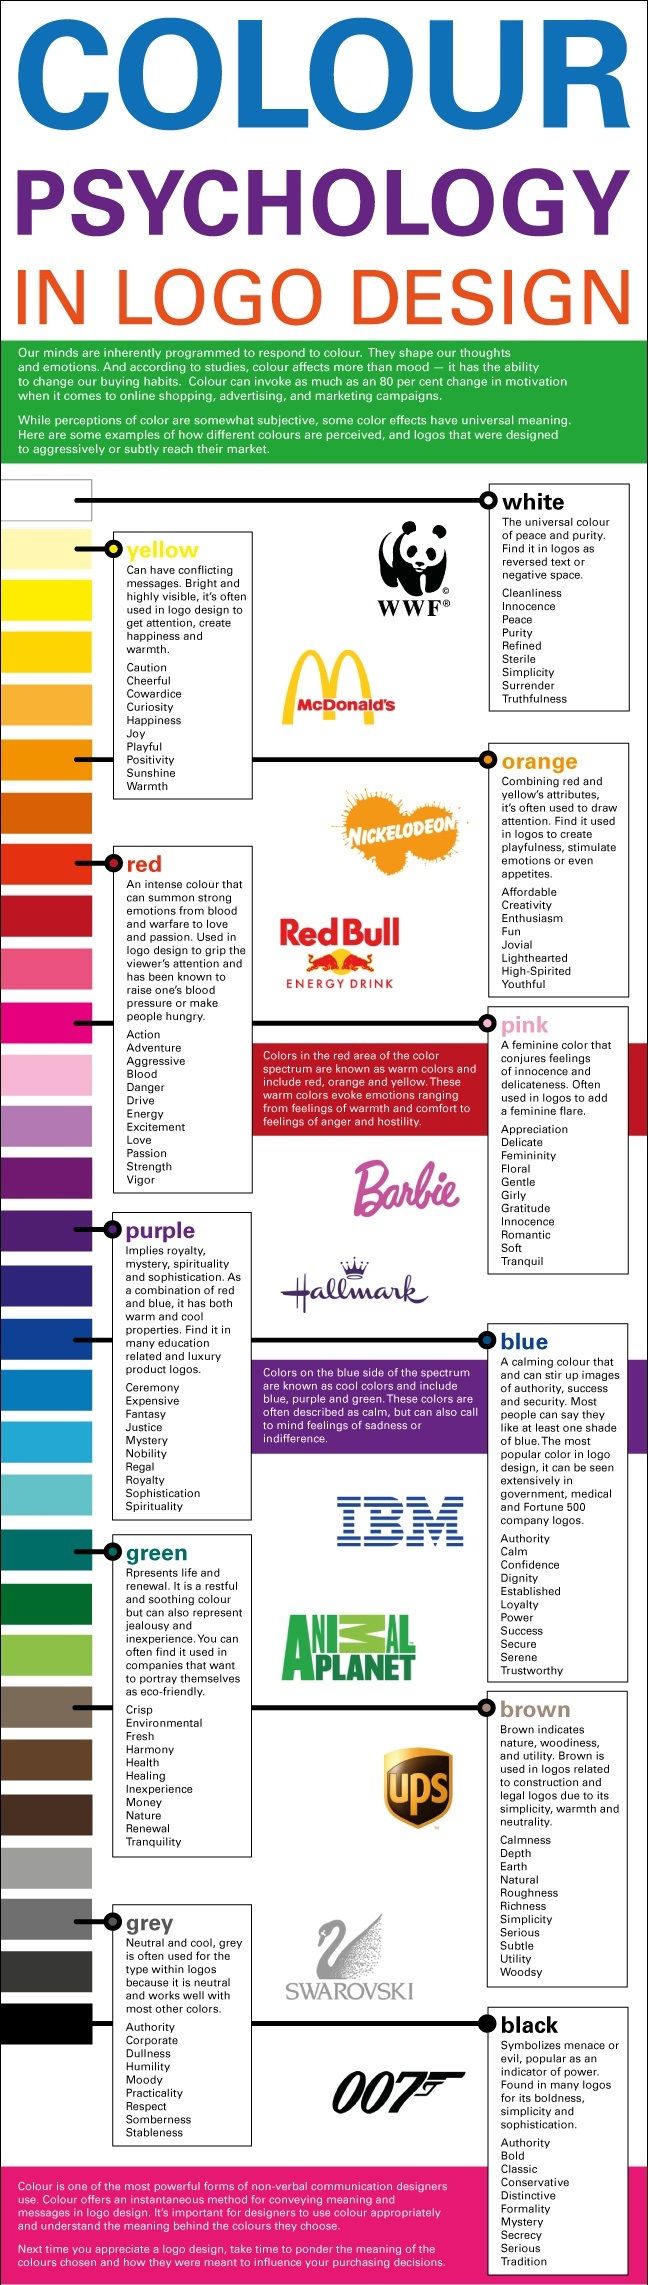 1530274829_851_Marketing-Infographic-Color-psychology-Designers-use-it-to-evoke-a-mood-and-even-change-behaviors.-Cl Marketing Infographic : Color Psychology: What Do Your Brand Colors Say About You? #infographic